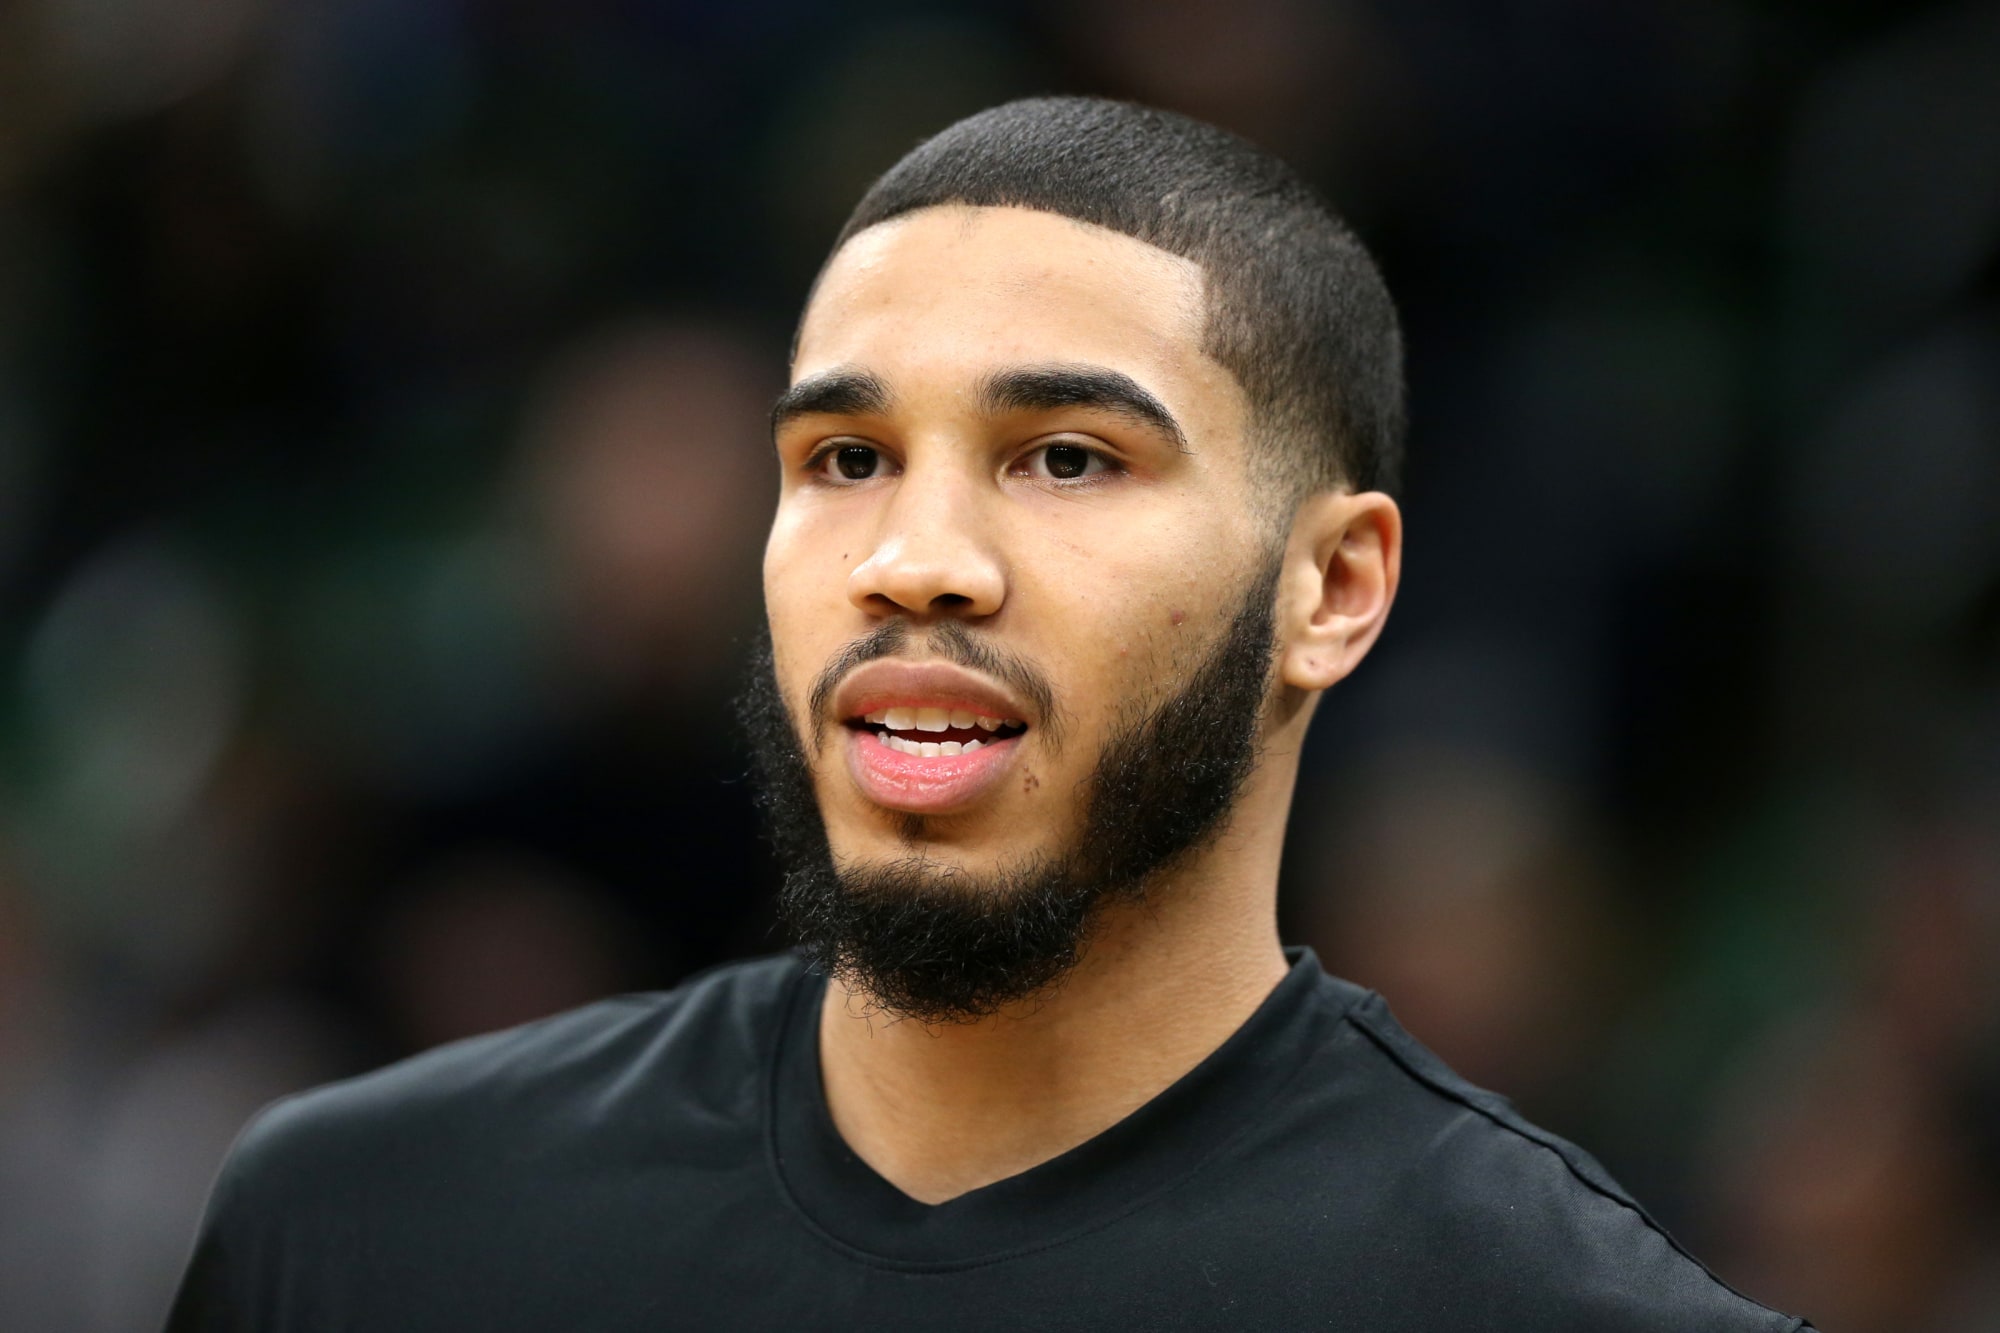 Jayson Tatum drops careerhigh 39 points prior to Christmas Day battle